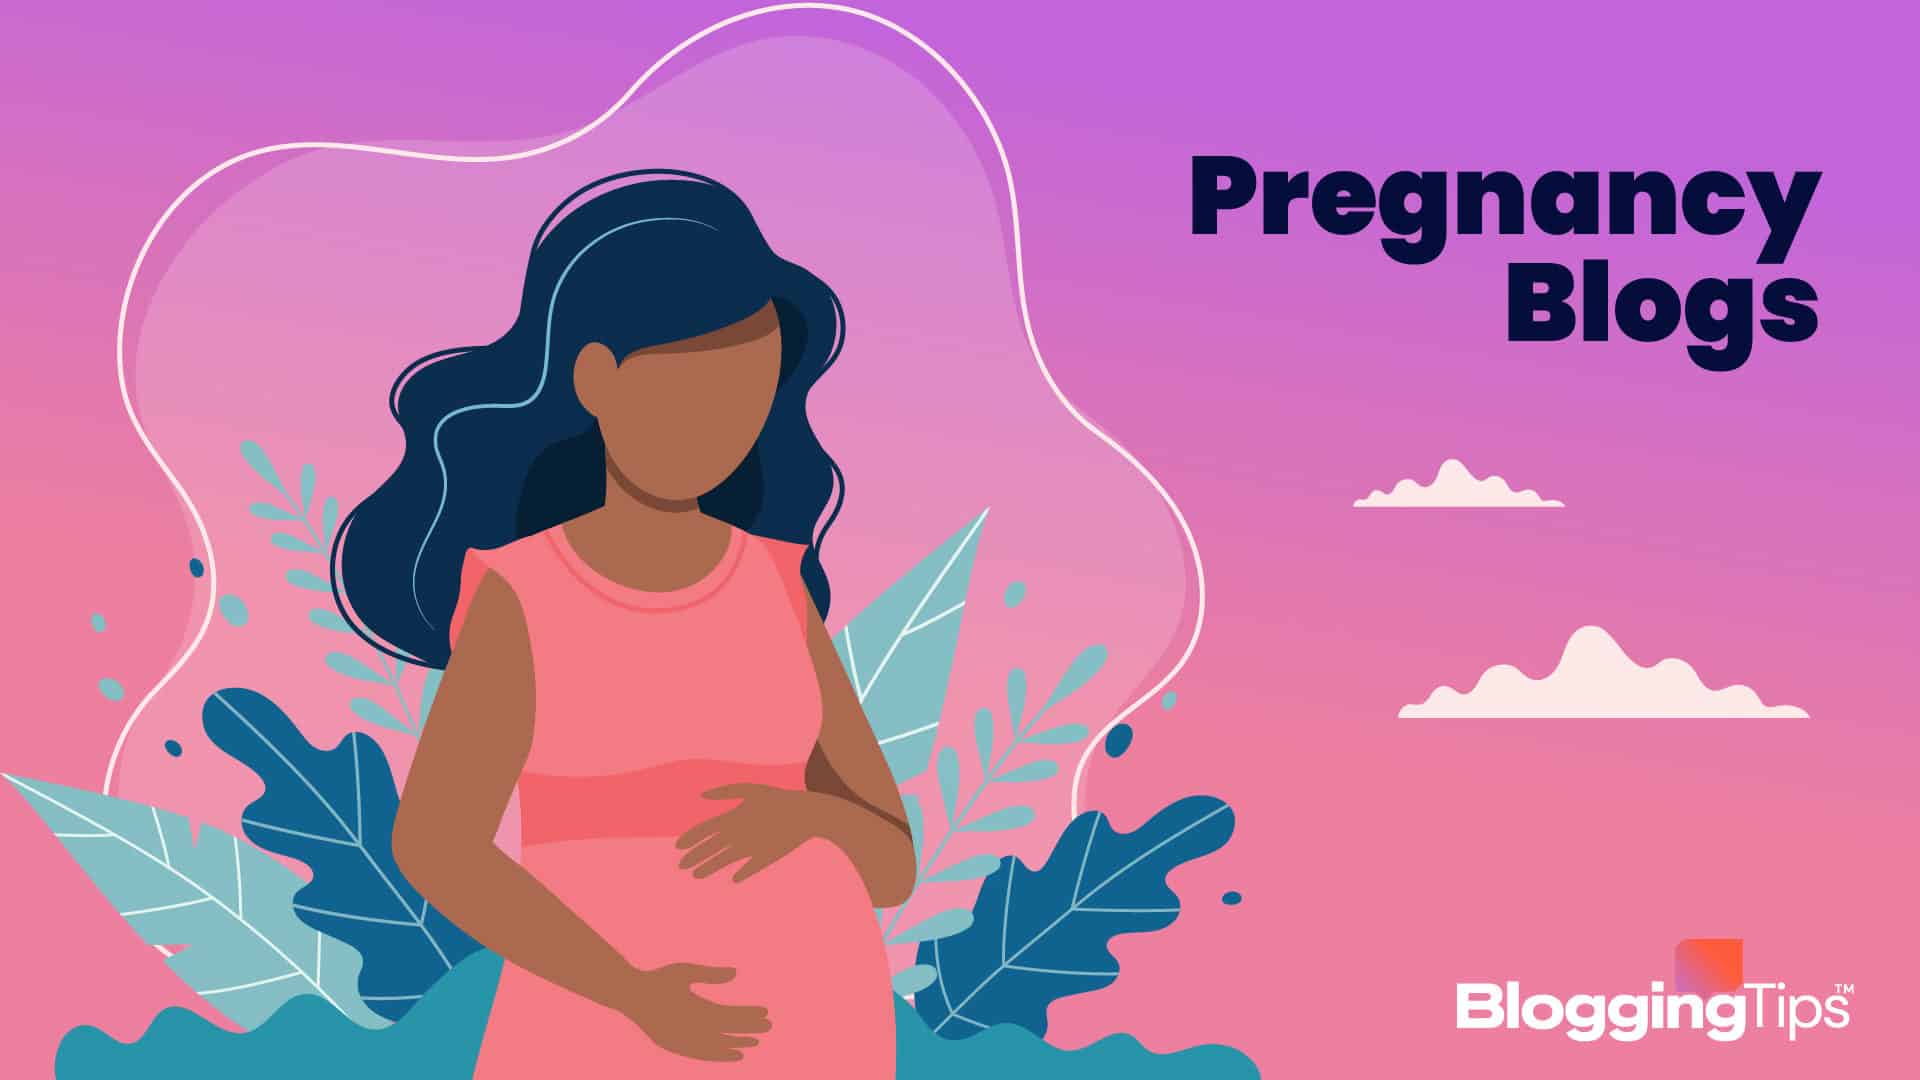 vector graphic showing an illustration of a pregnant person on a computer screen with the big block text 